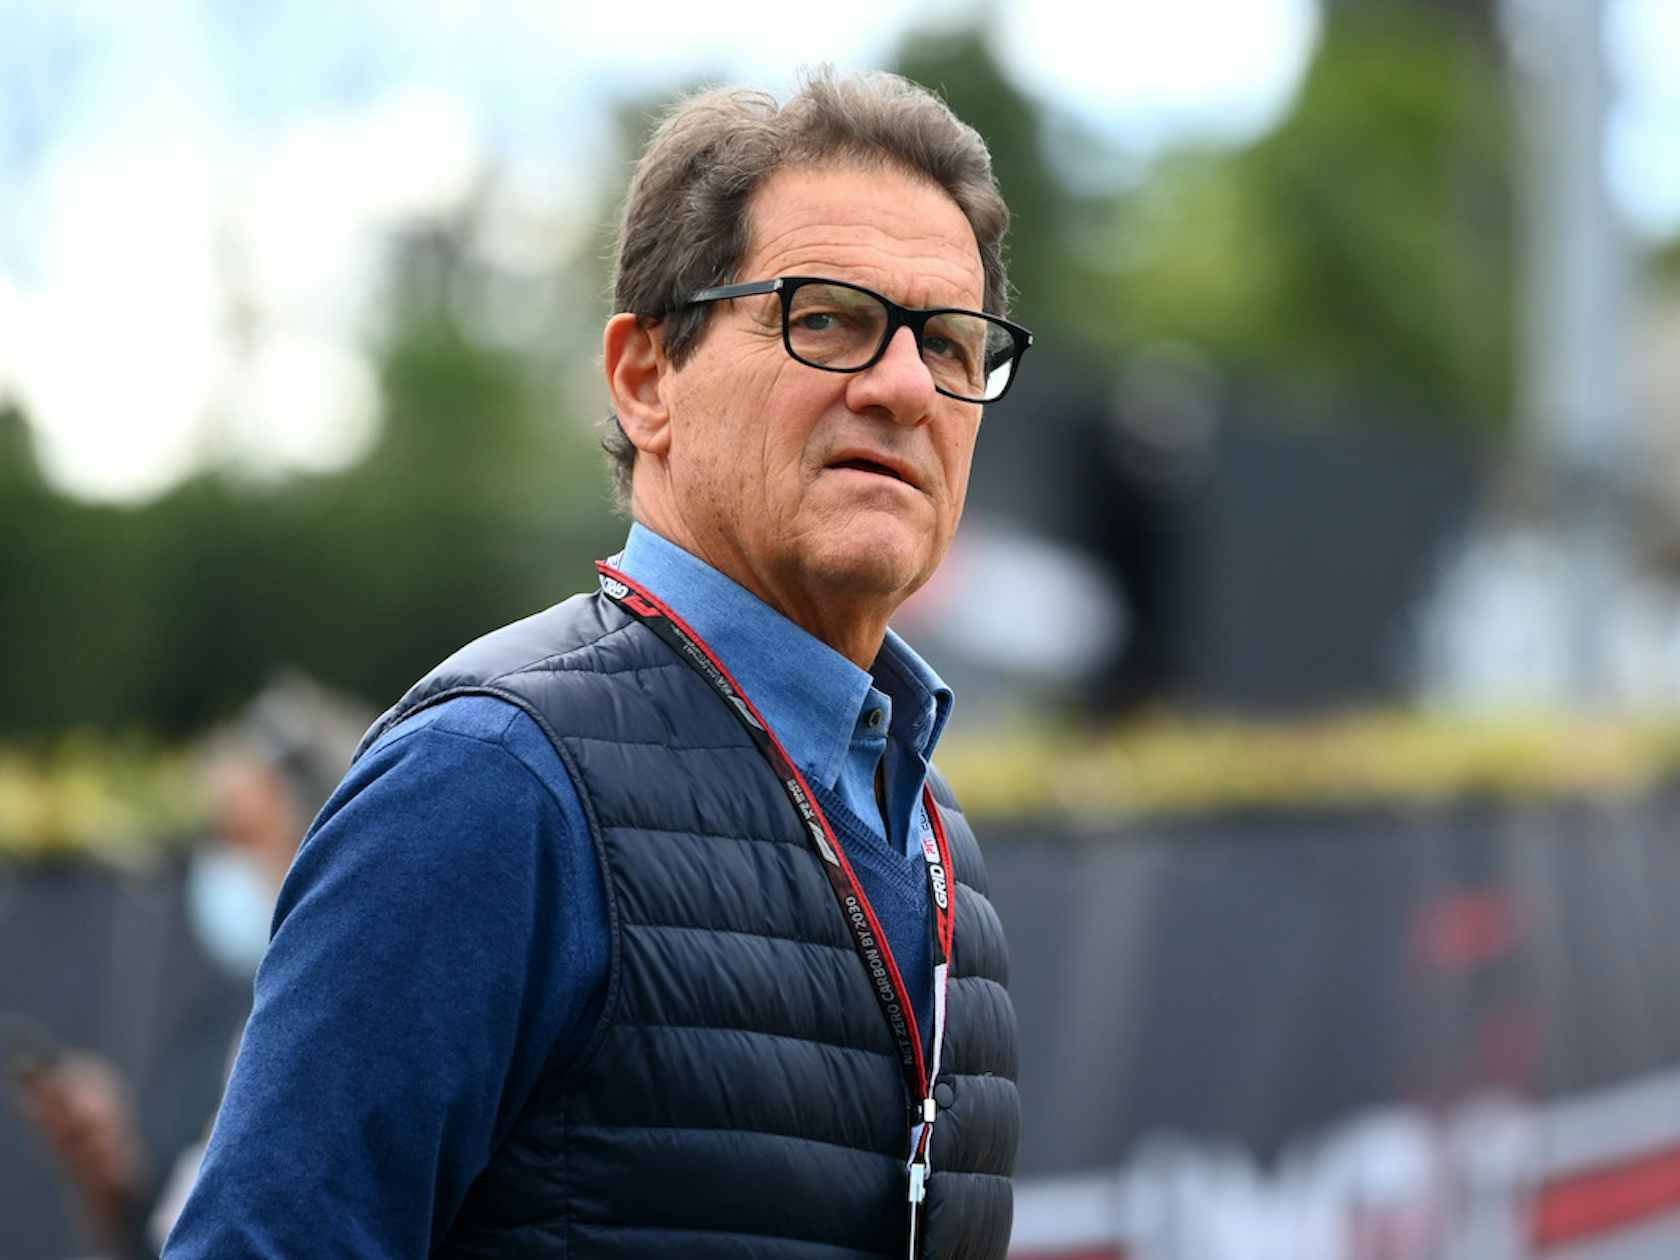 Capello: Inter will struggle to retain title, Scudetto battle between Juventus and Milan